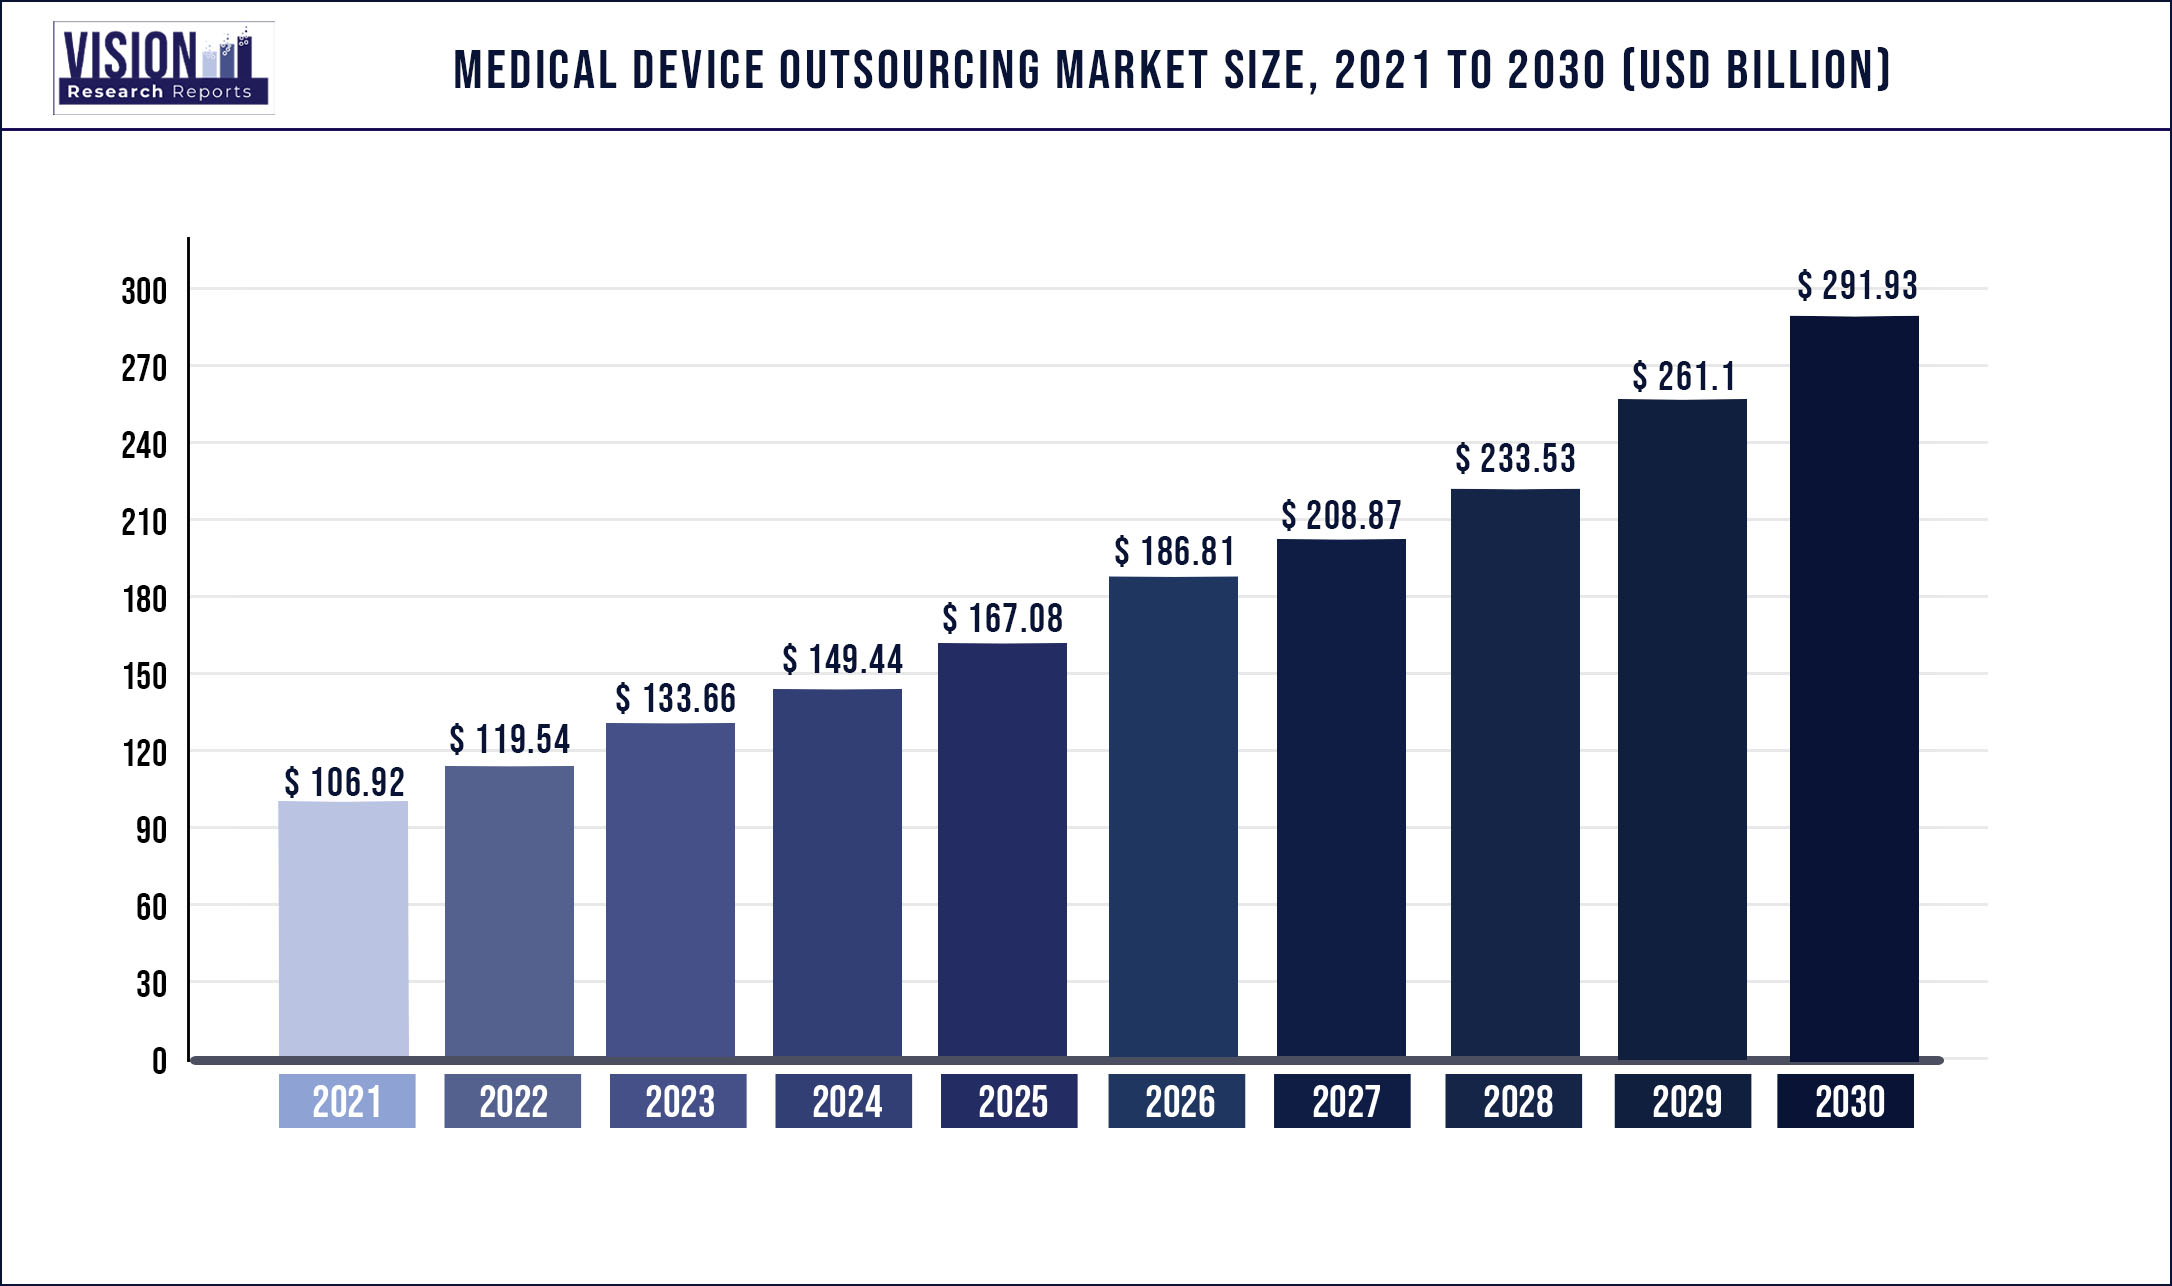 Medical Device Outsourcing Market Size 2021 to 2030